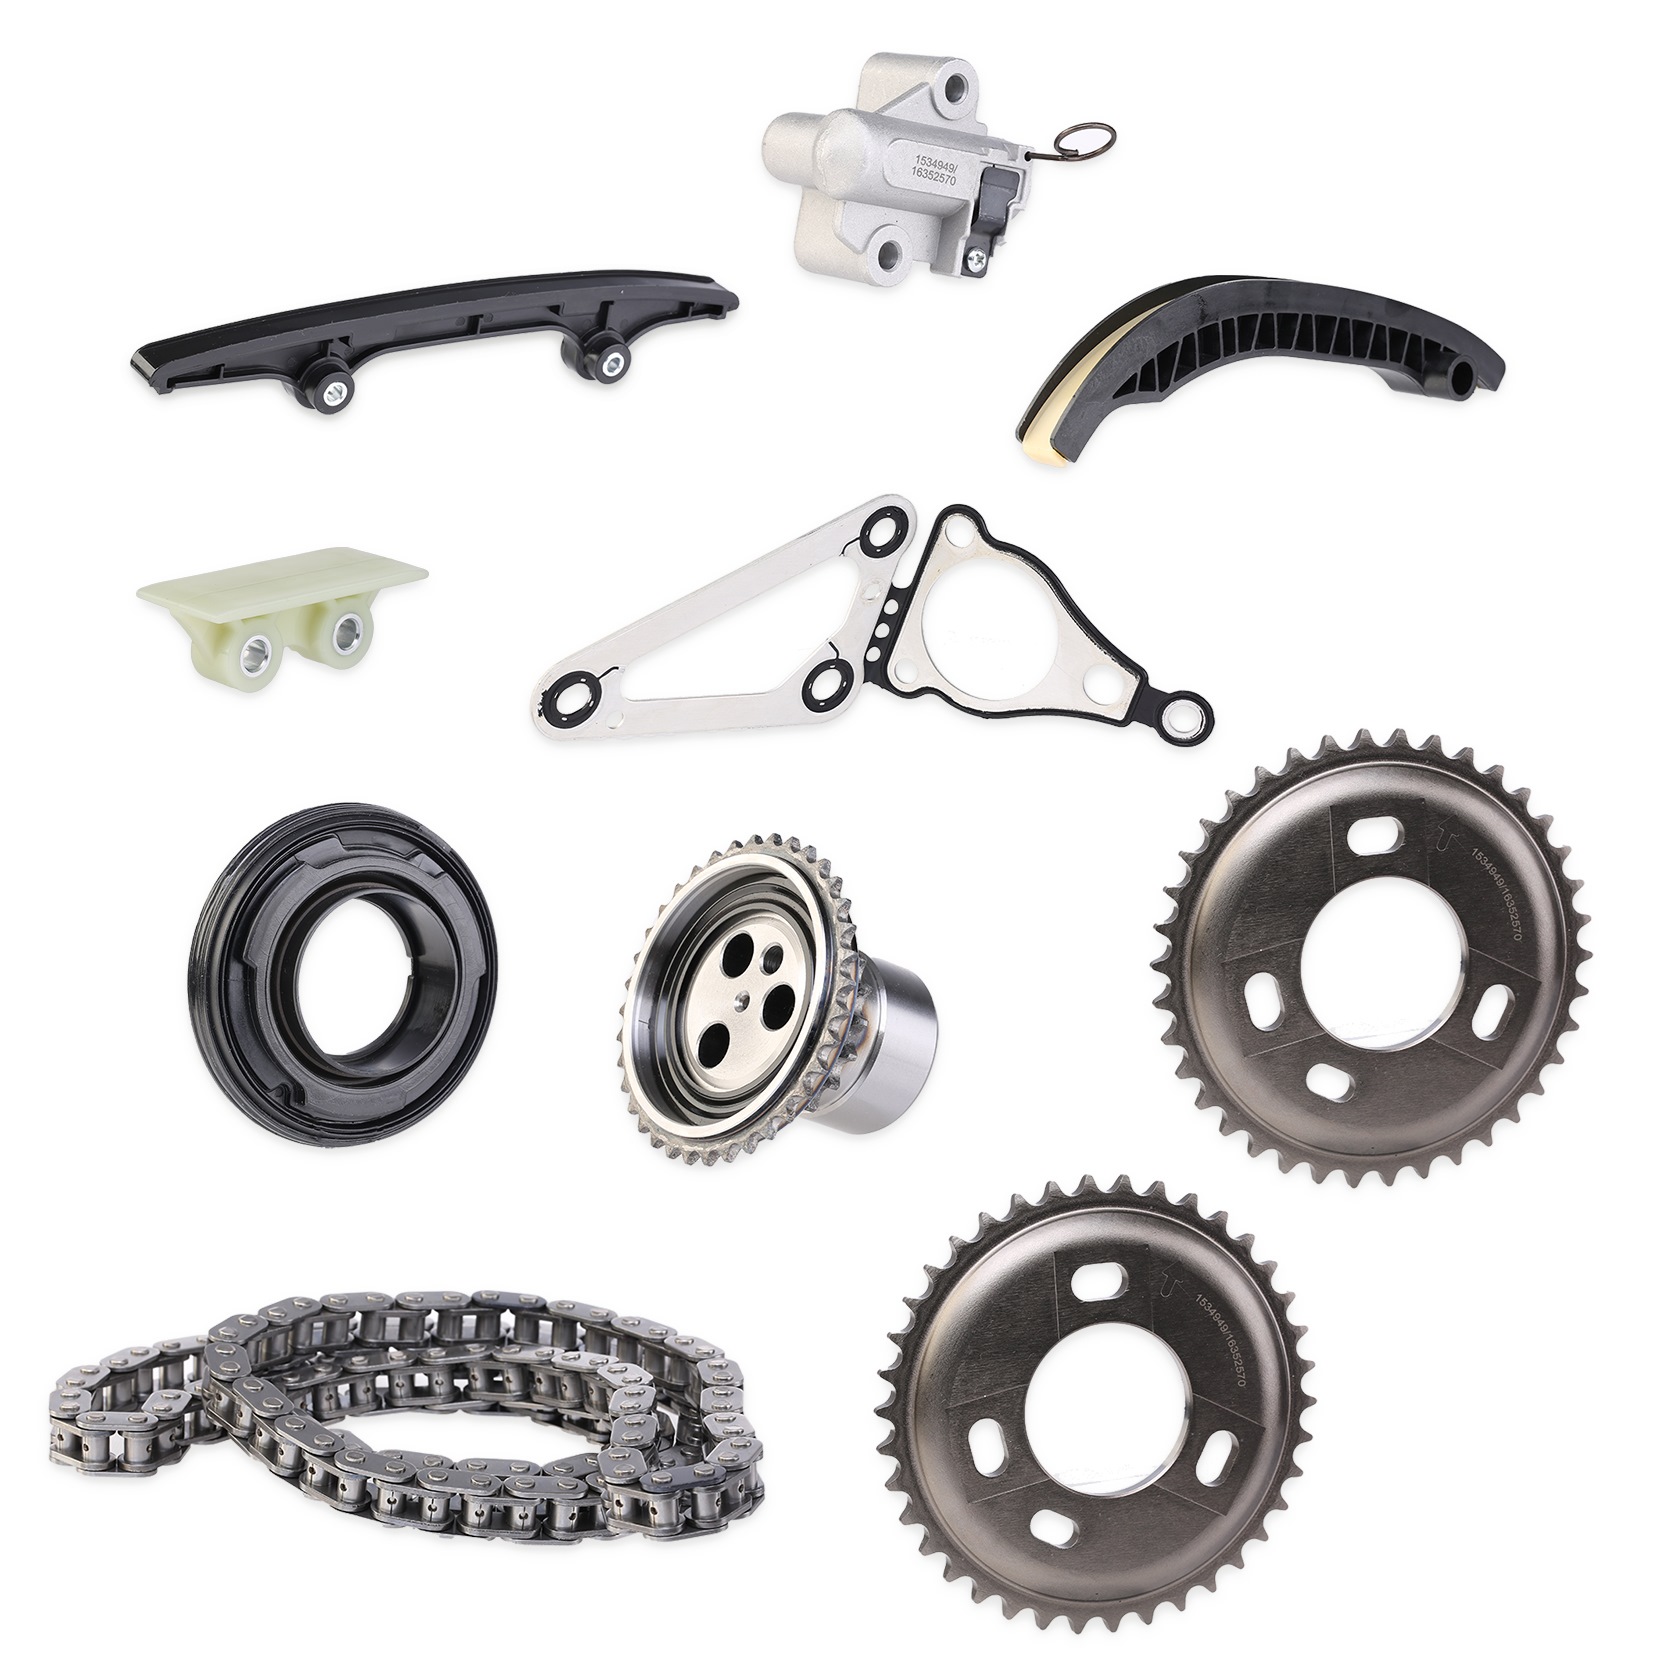 STARK SKTCK-22440377 Timing chain kit with gaskets/seals, with gear, Simplex, Bolt Chain